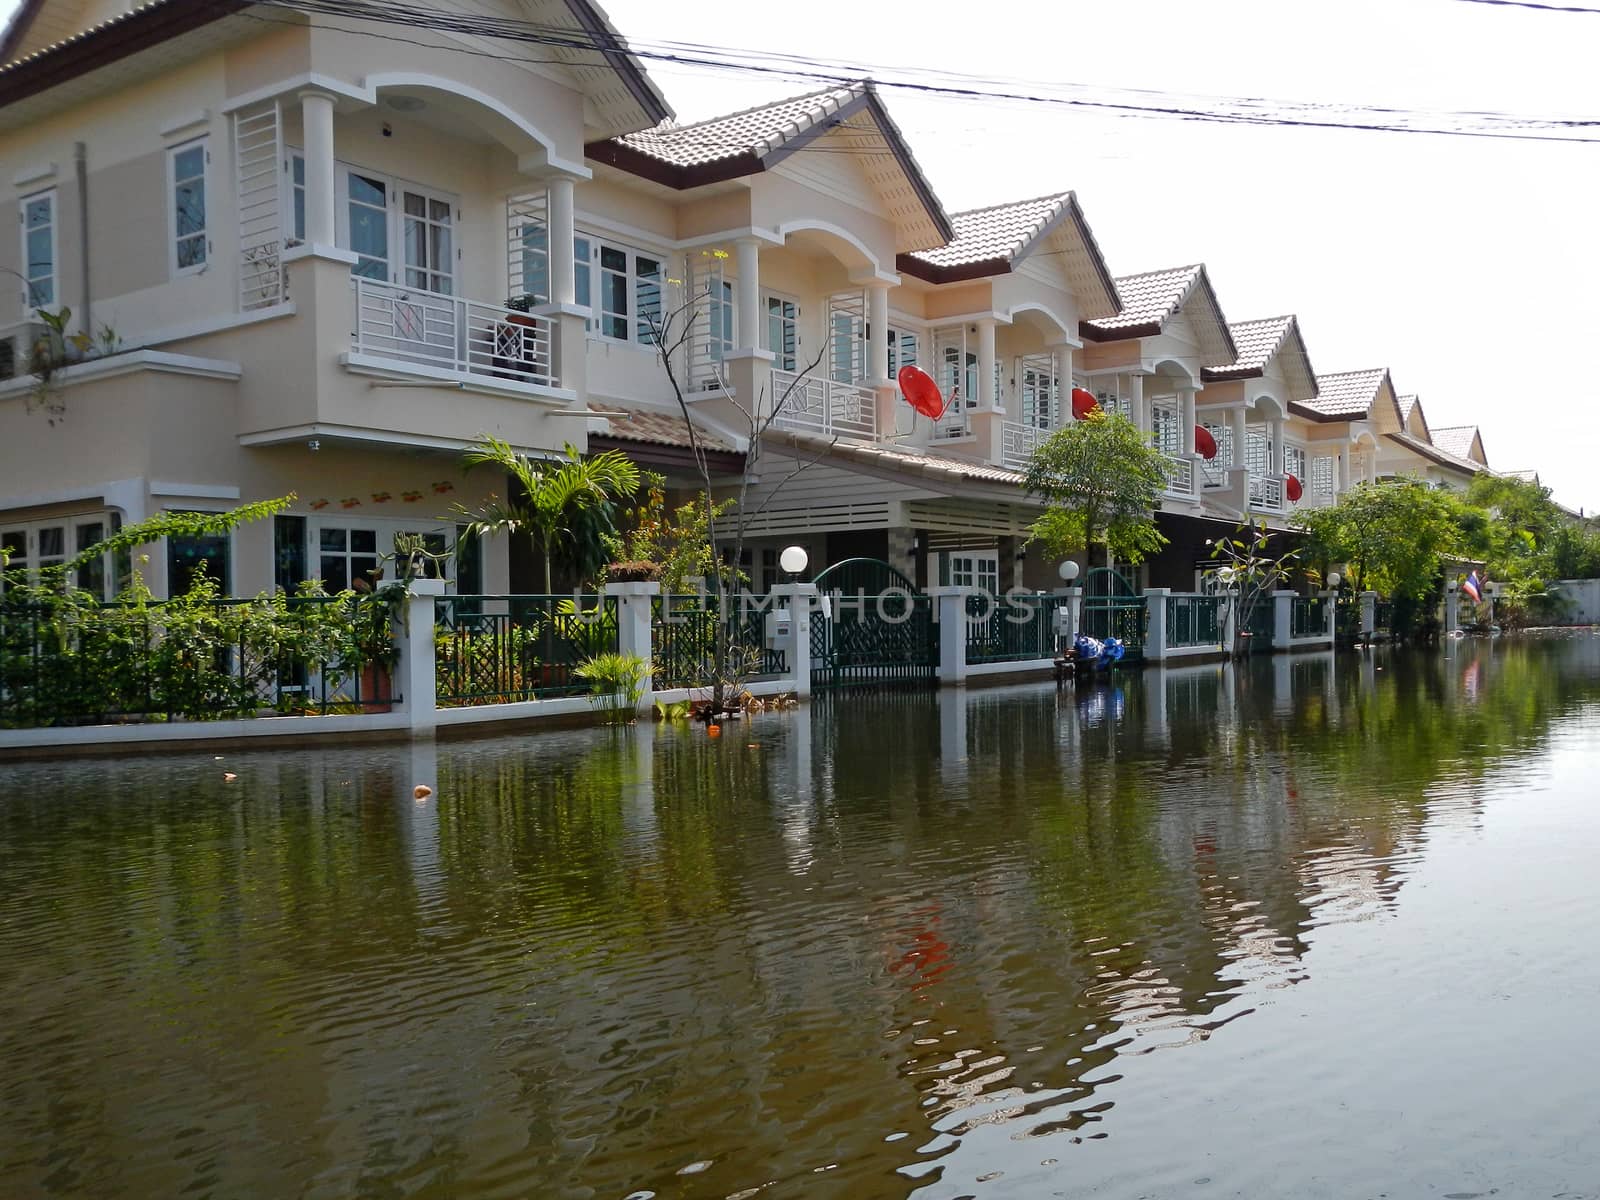 flood waters overtake a house in Thailand by think4photop